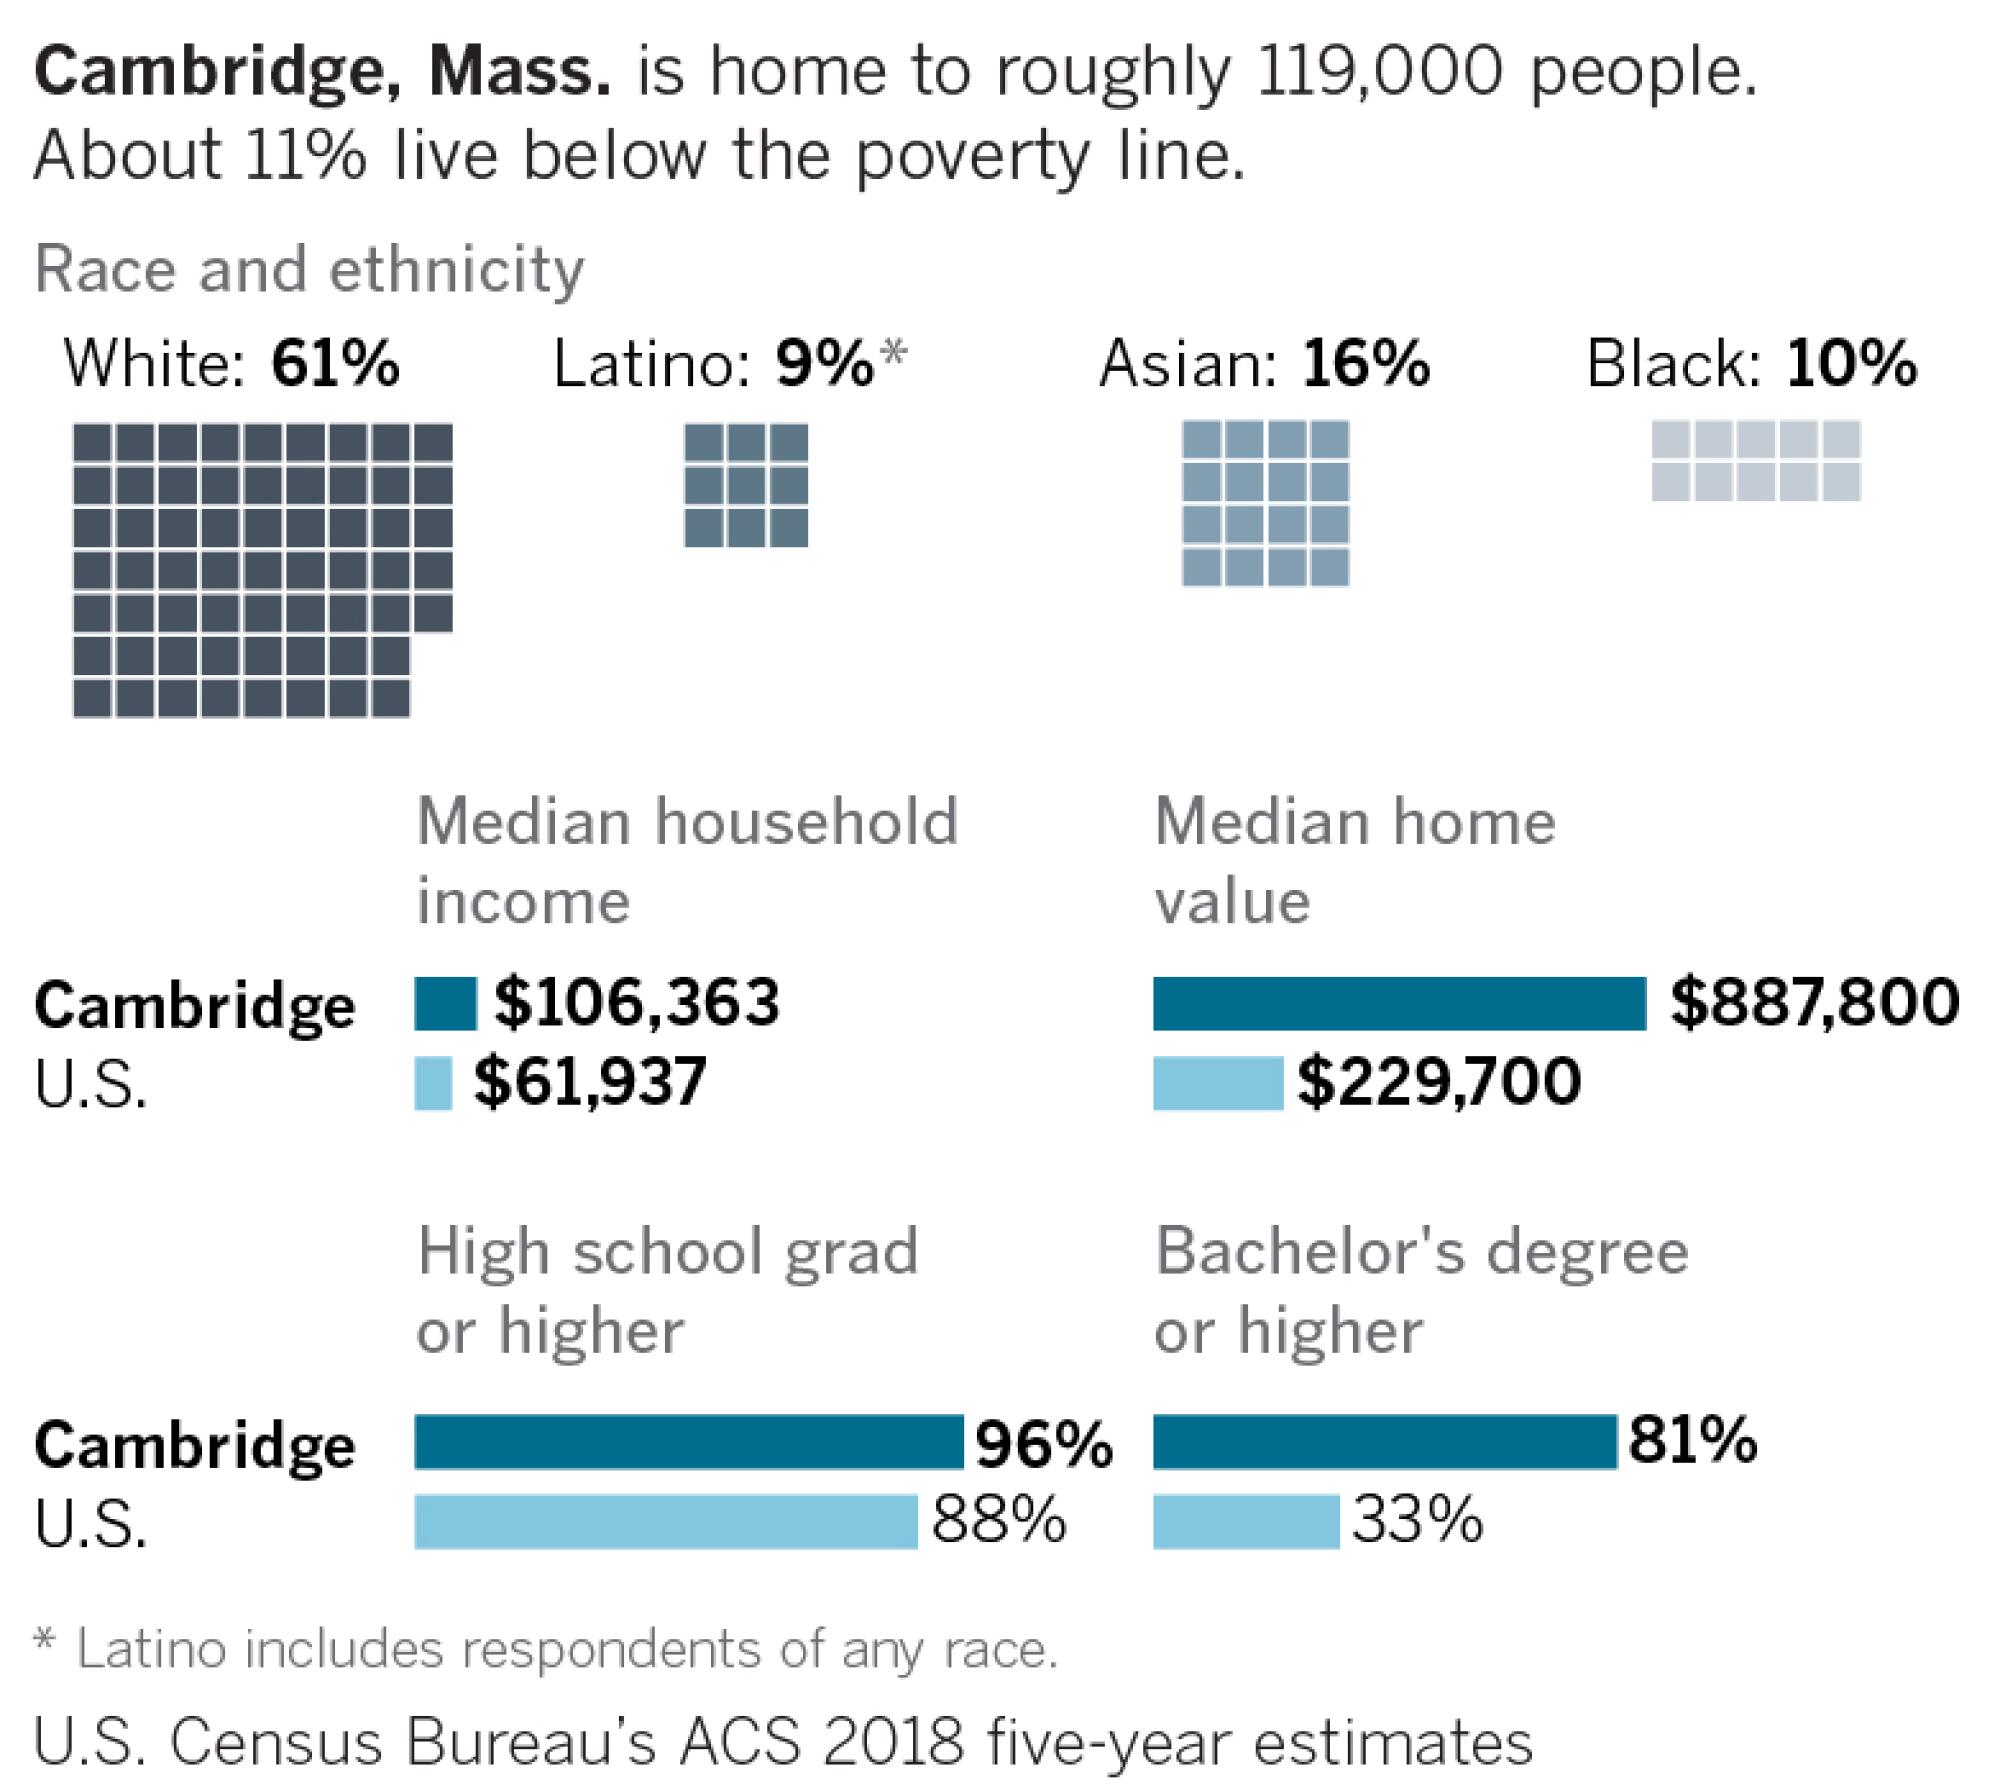 Cambridge, Mass. is home to roughly 119,000 people. About 11% live below the poverty line.  